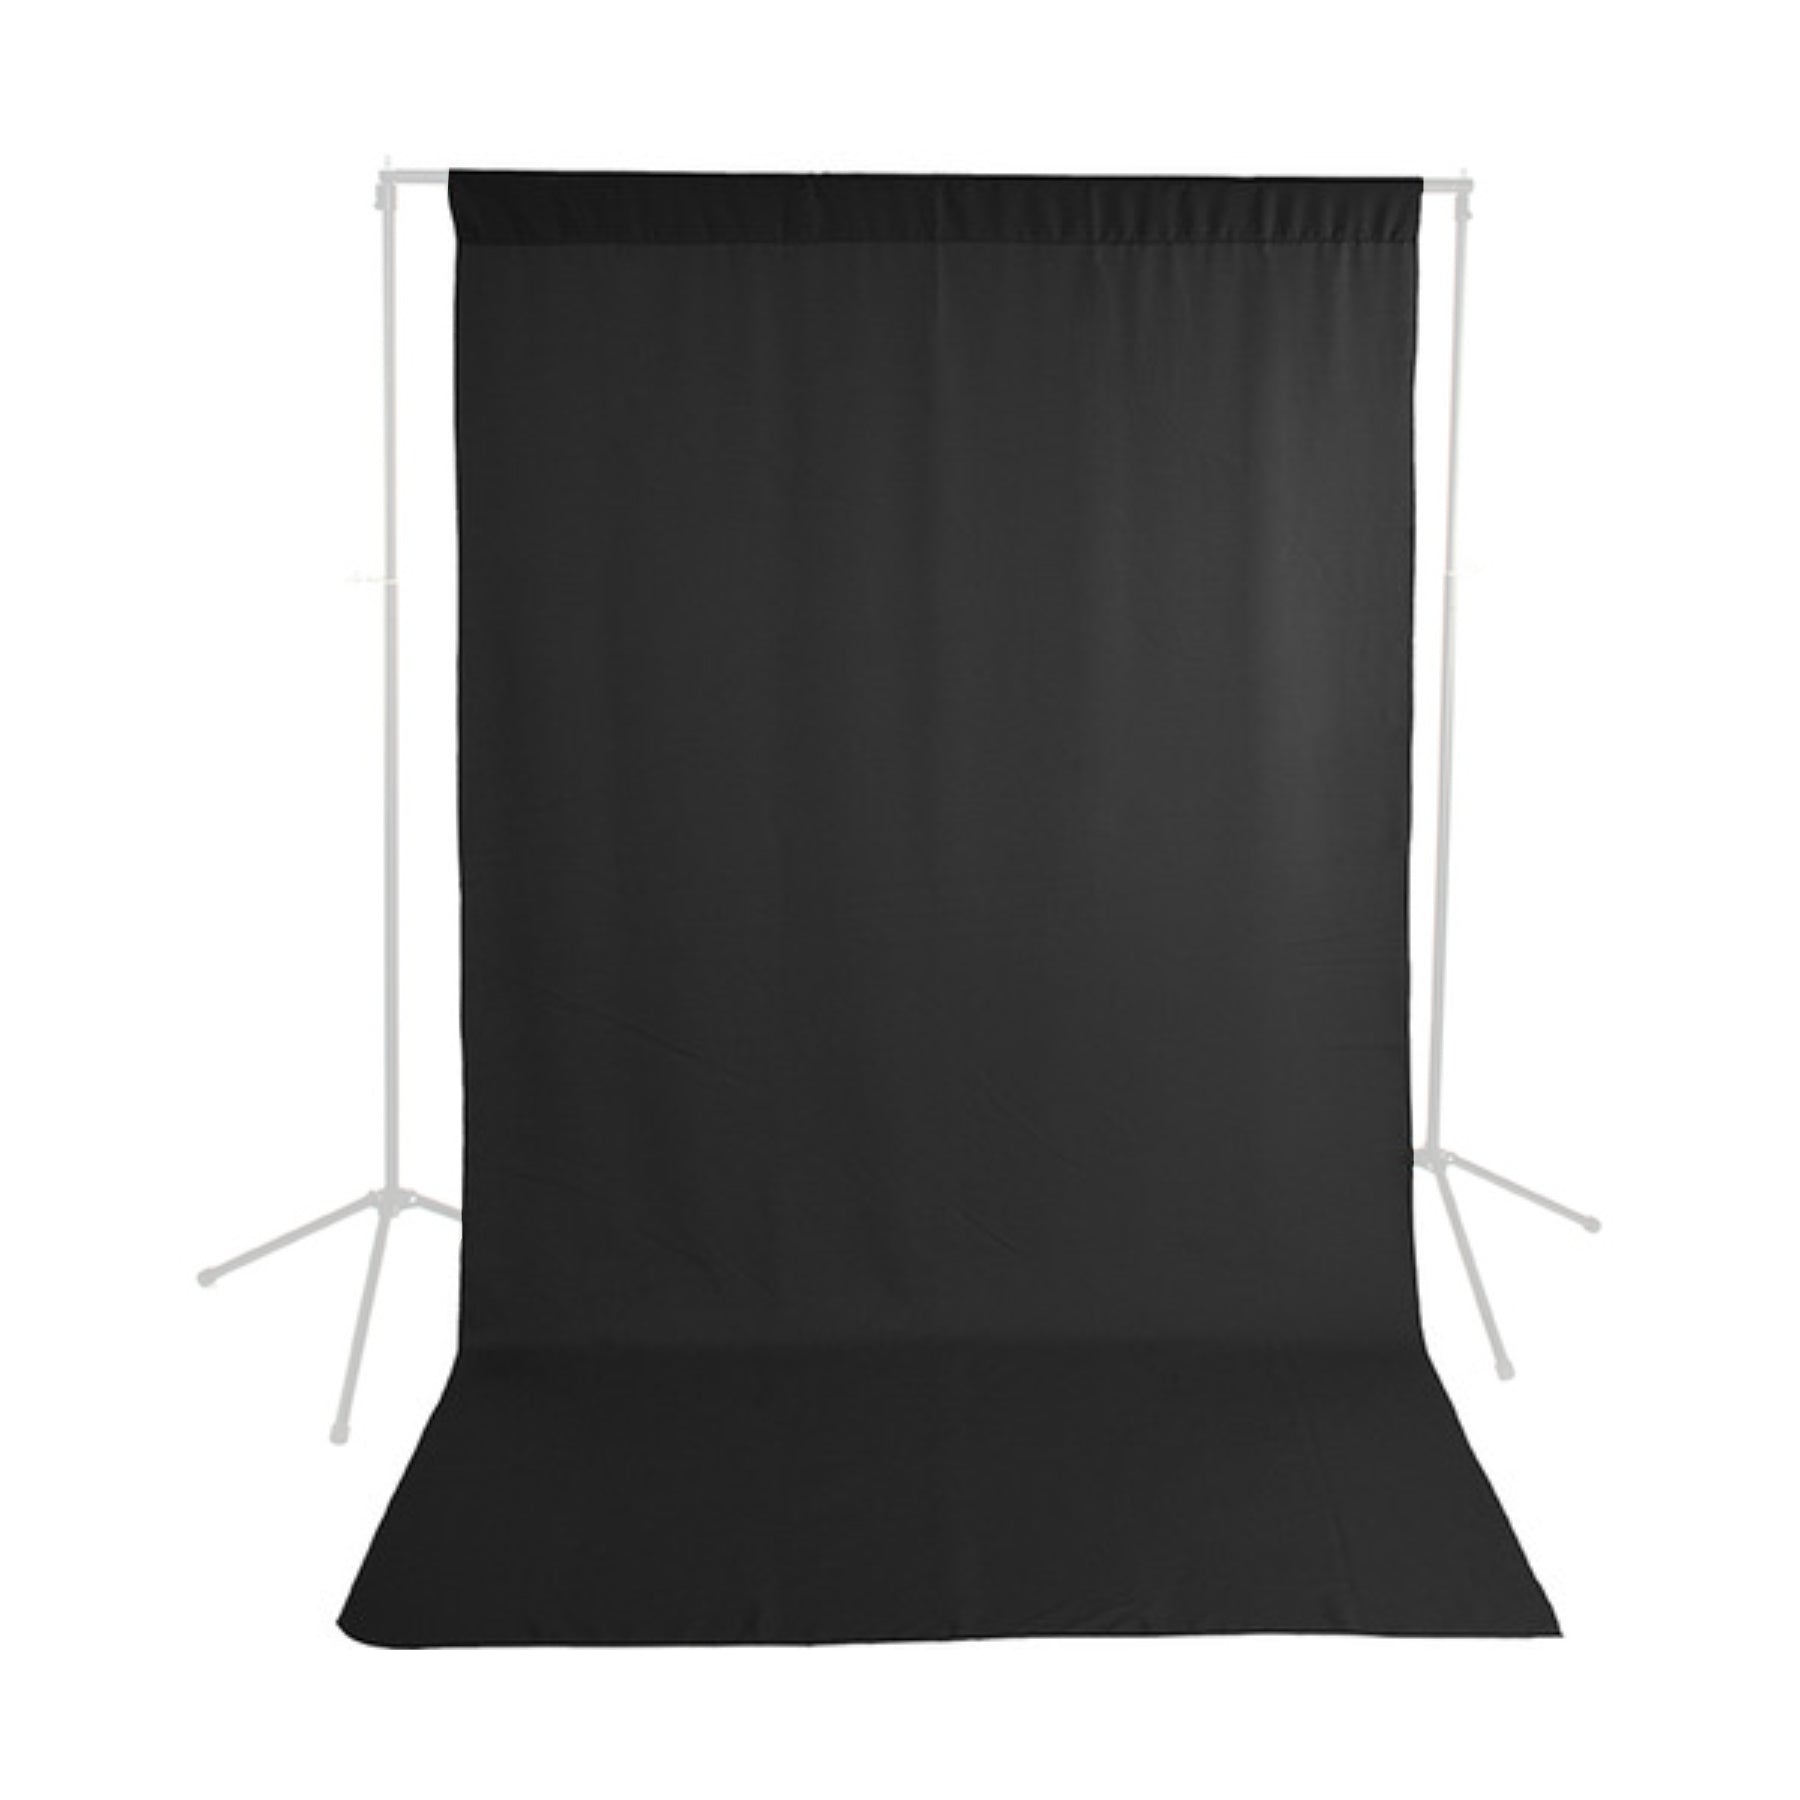 Black backdrop material for hire at Topic Rentals